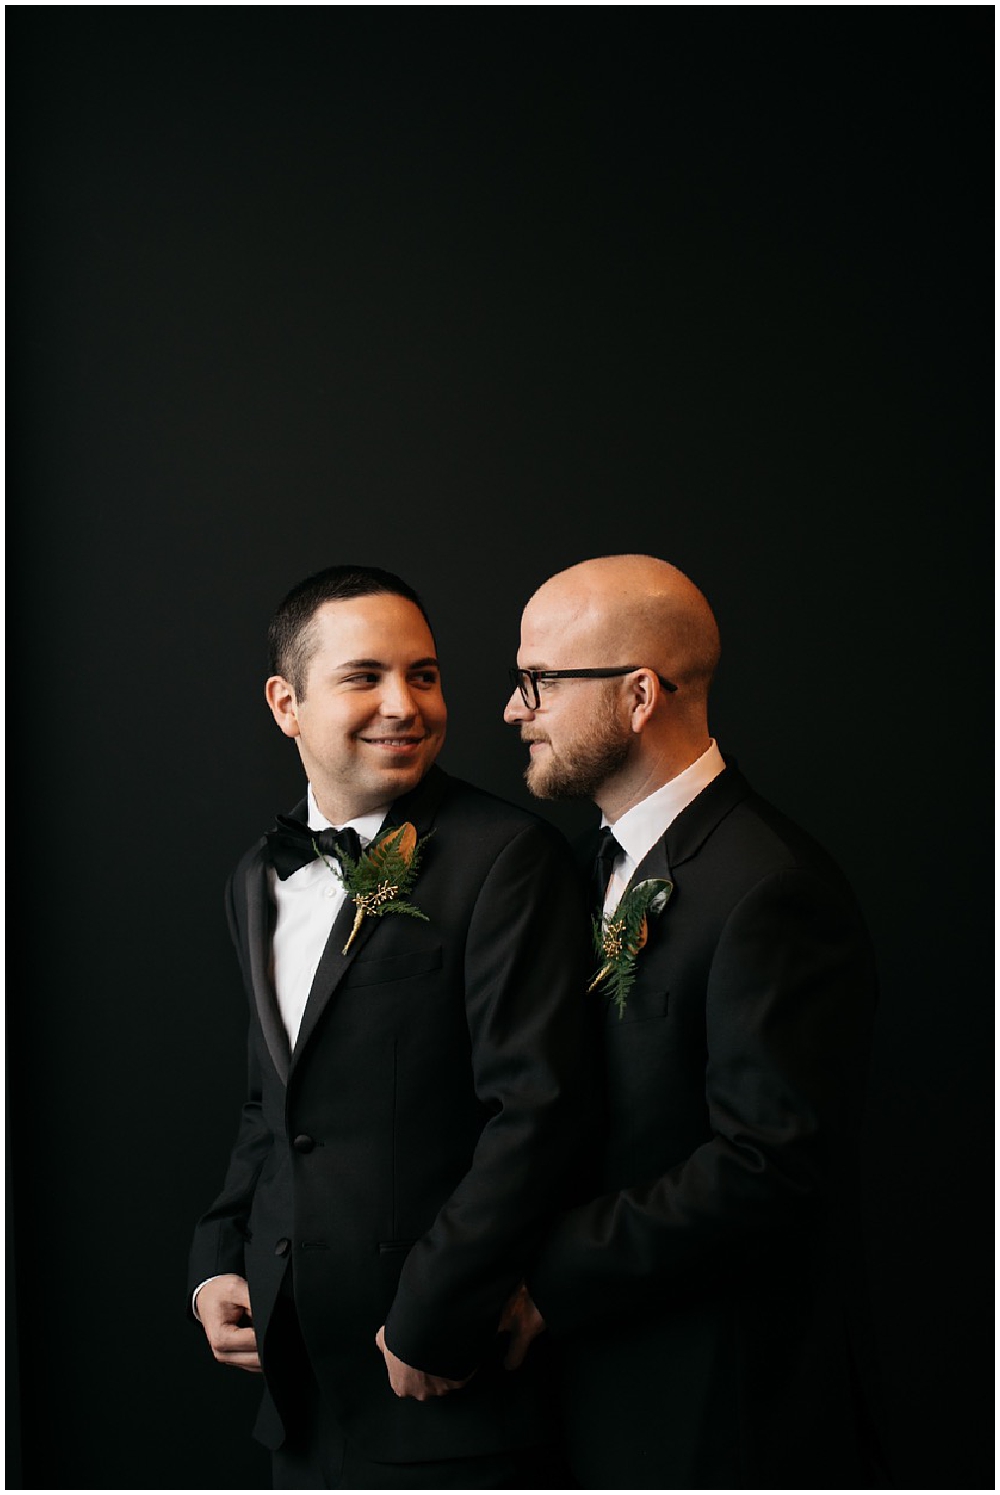 Two Grooms at the Tacoma Art Museum